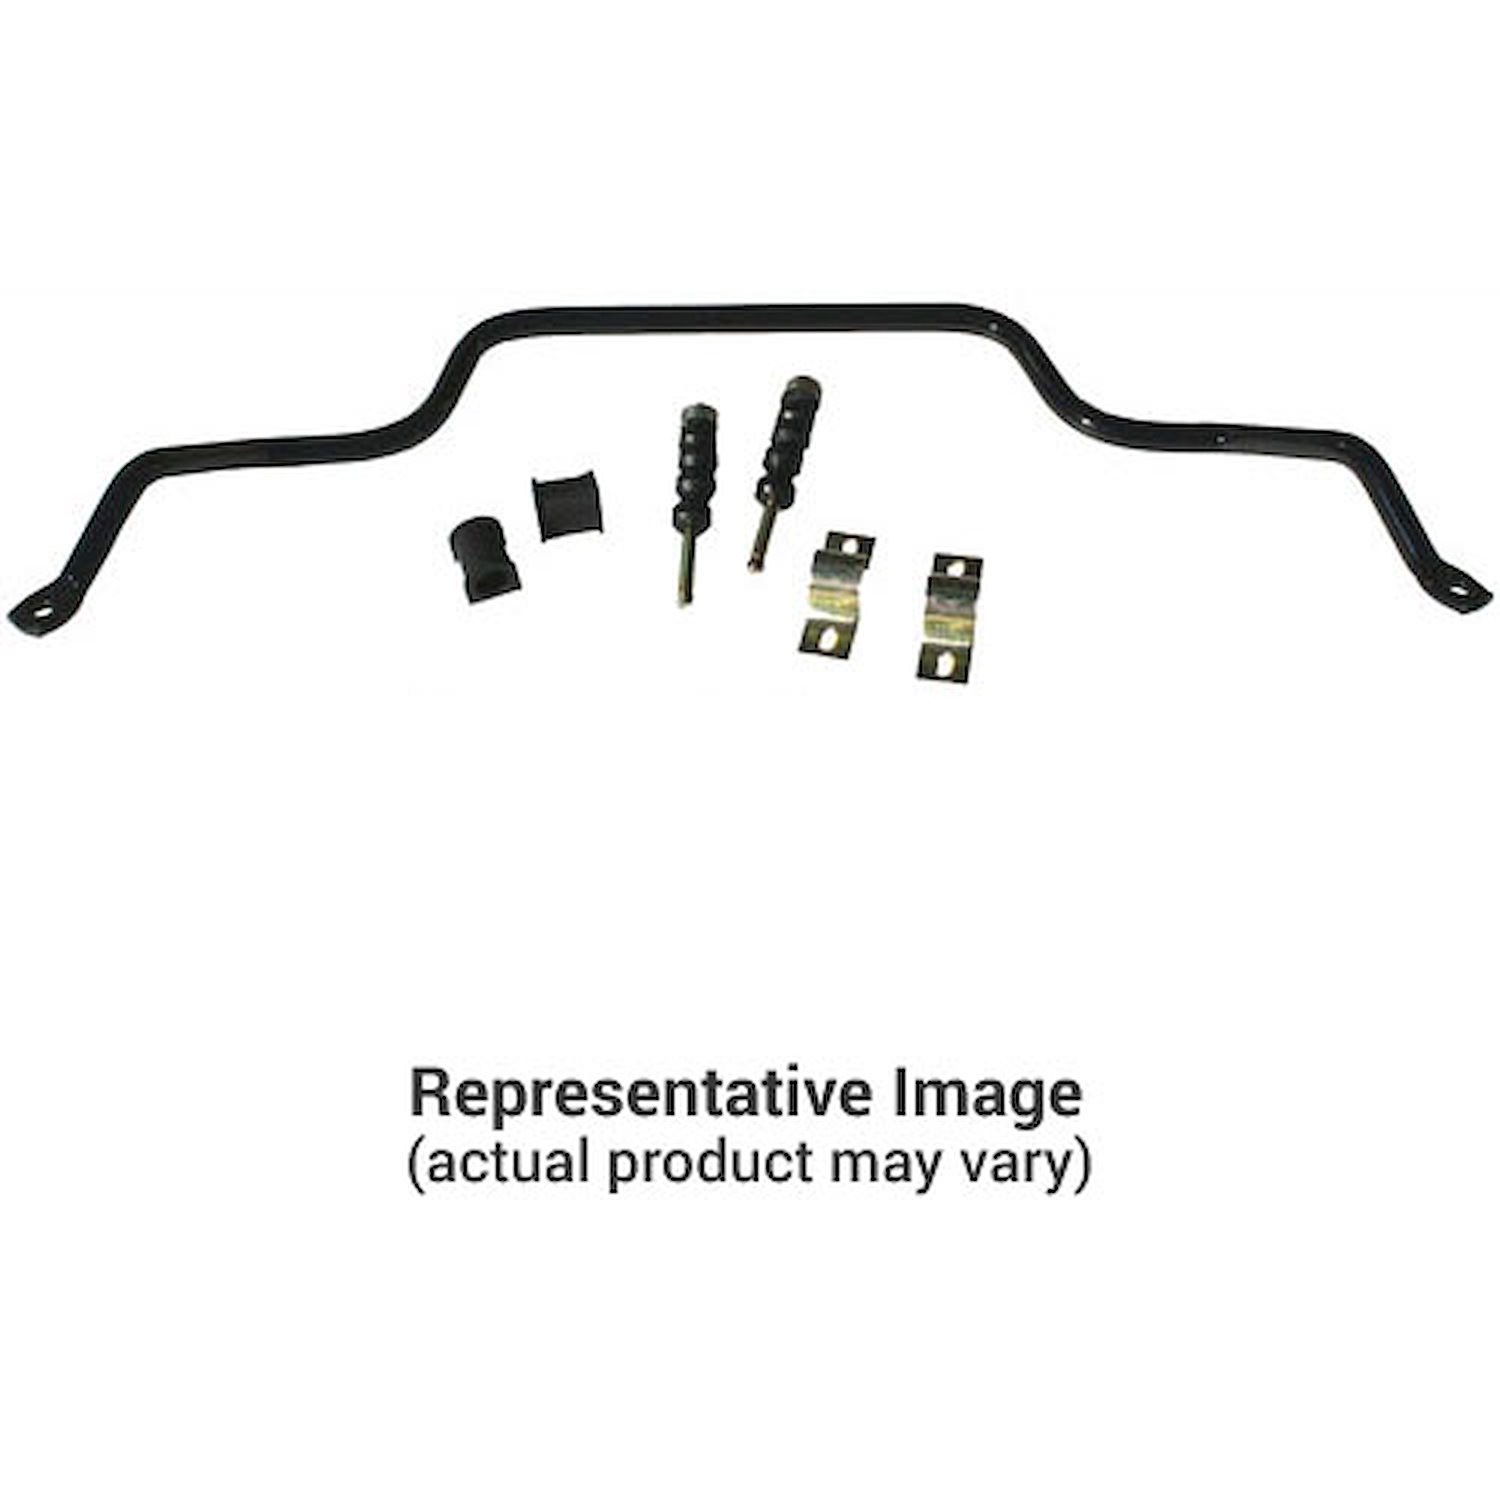 5/8" Rear Sway Bar Up to 1974 Civic, CR-X (Excl. Station Wagon)